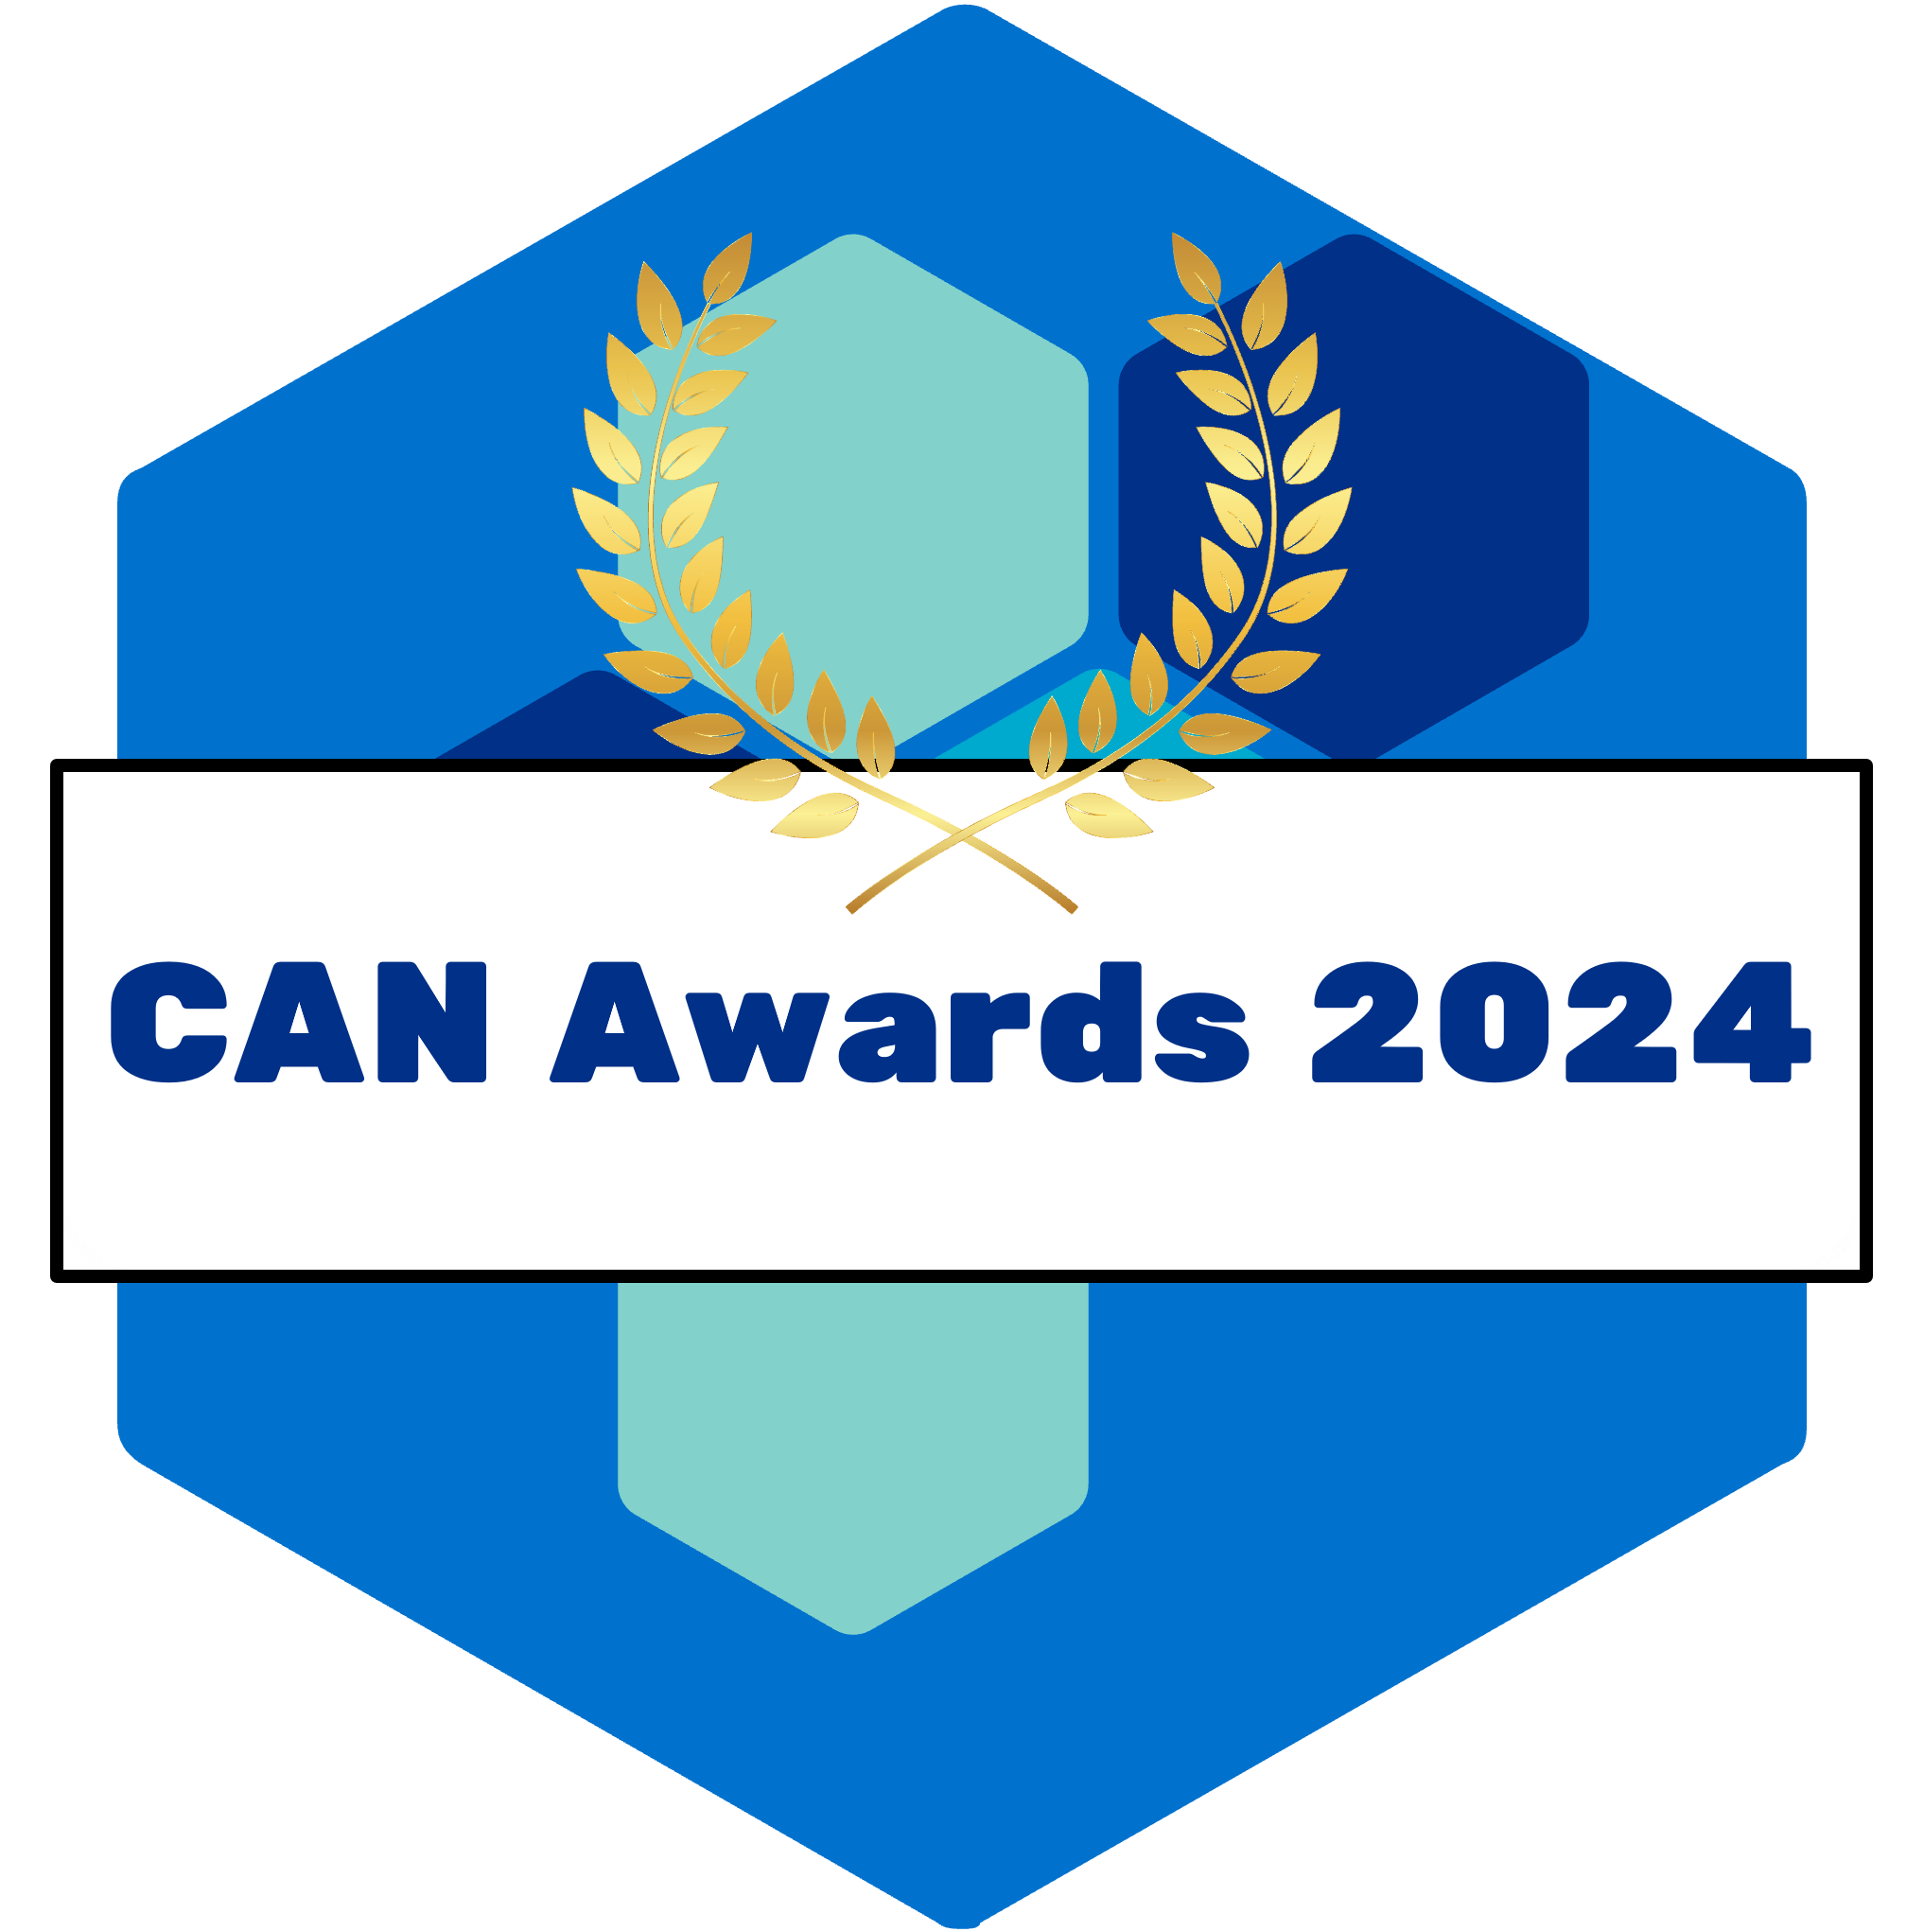 image for the CAN Awards award